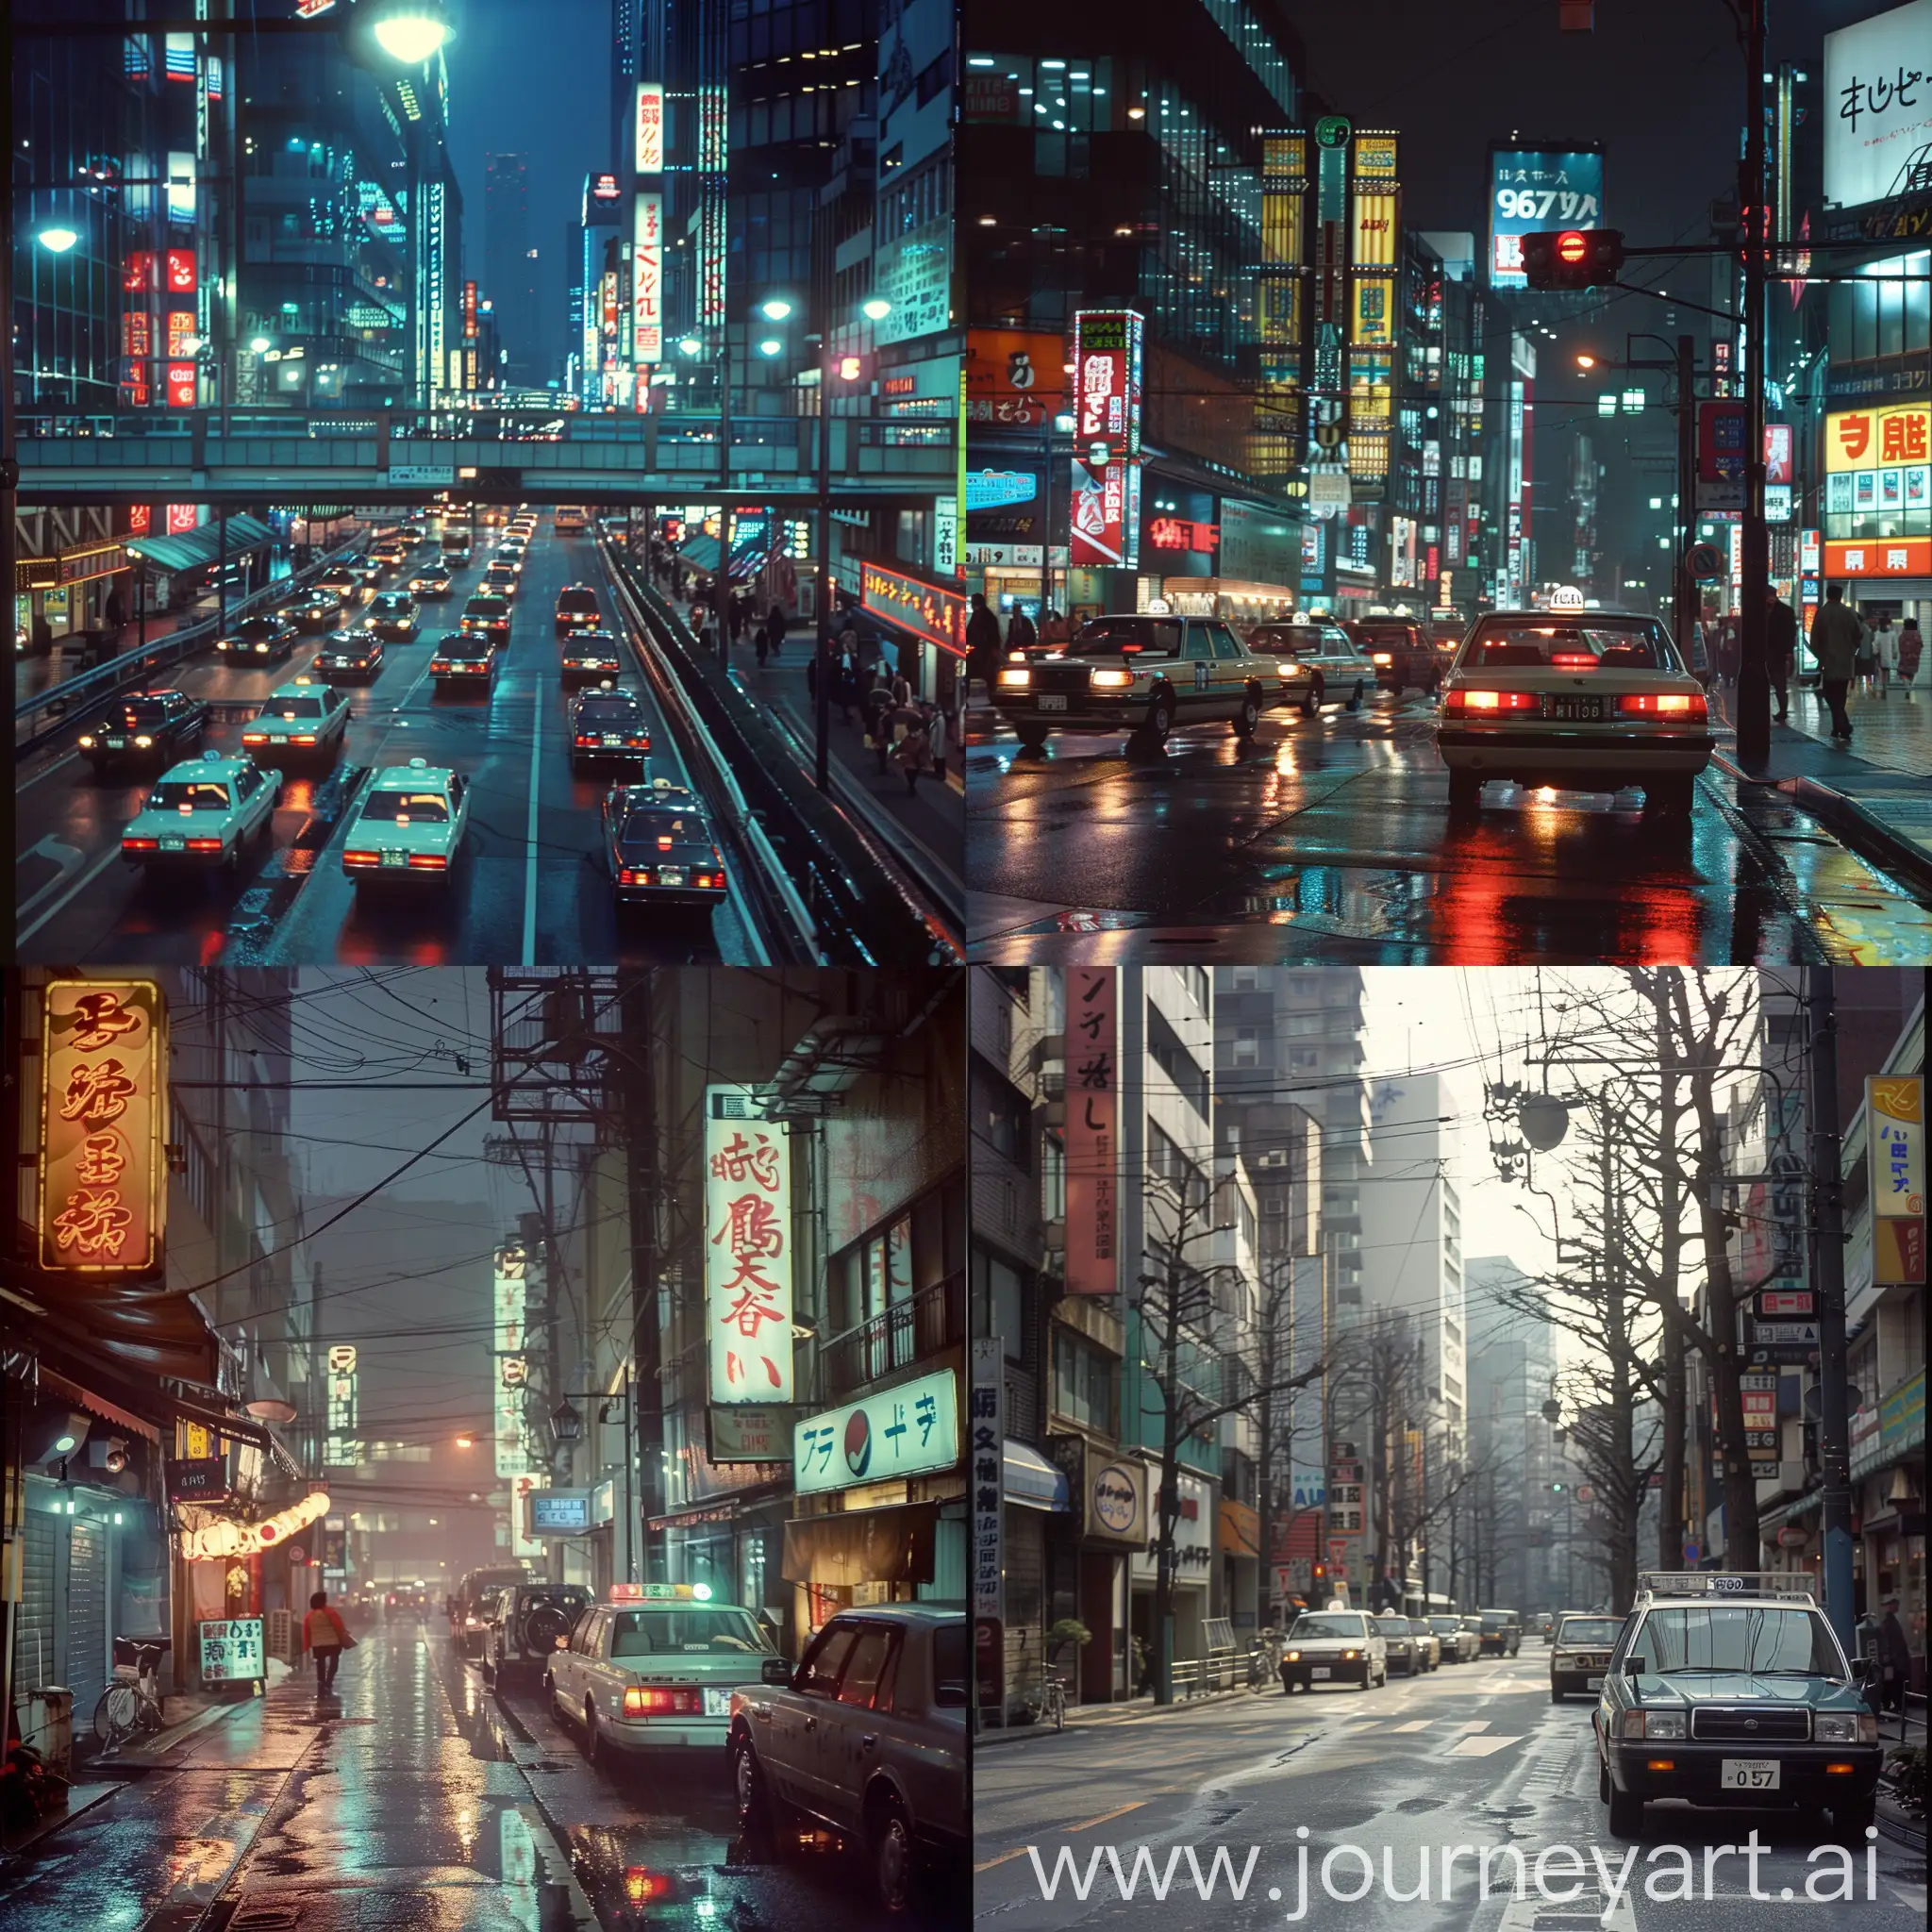 Tokyo-1985-Vintage-Street-Scene-with-Neon-Lights-and-Urban-Atmosphere